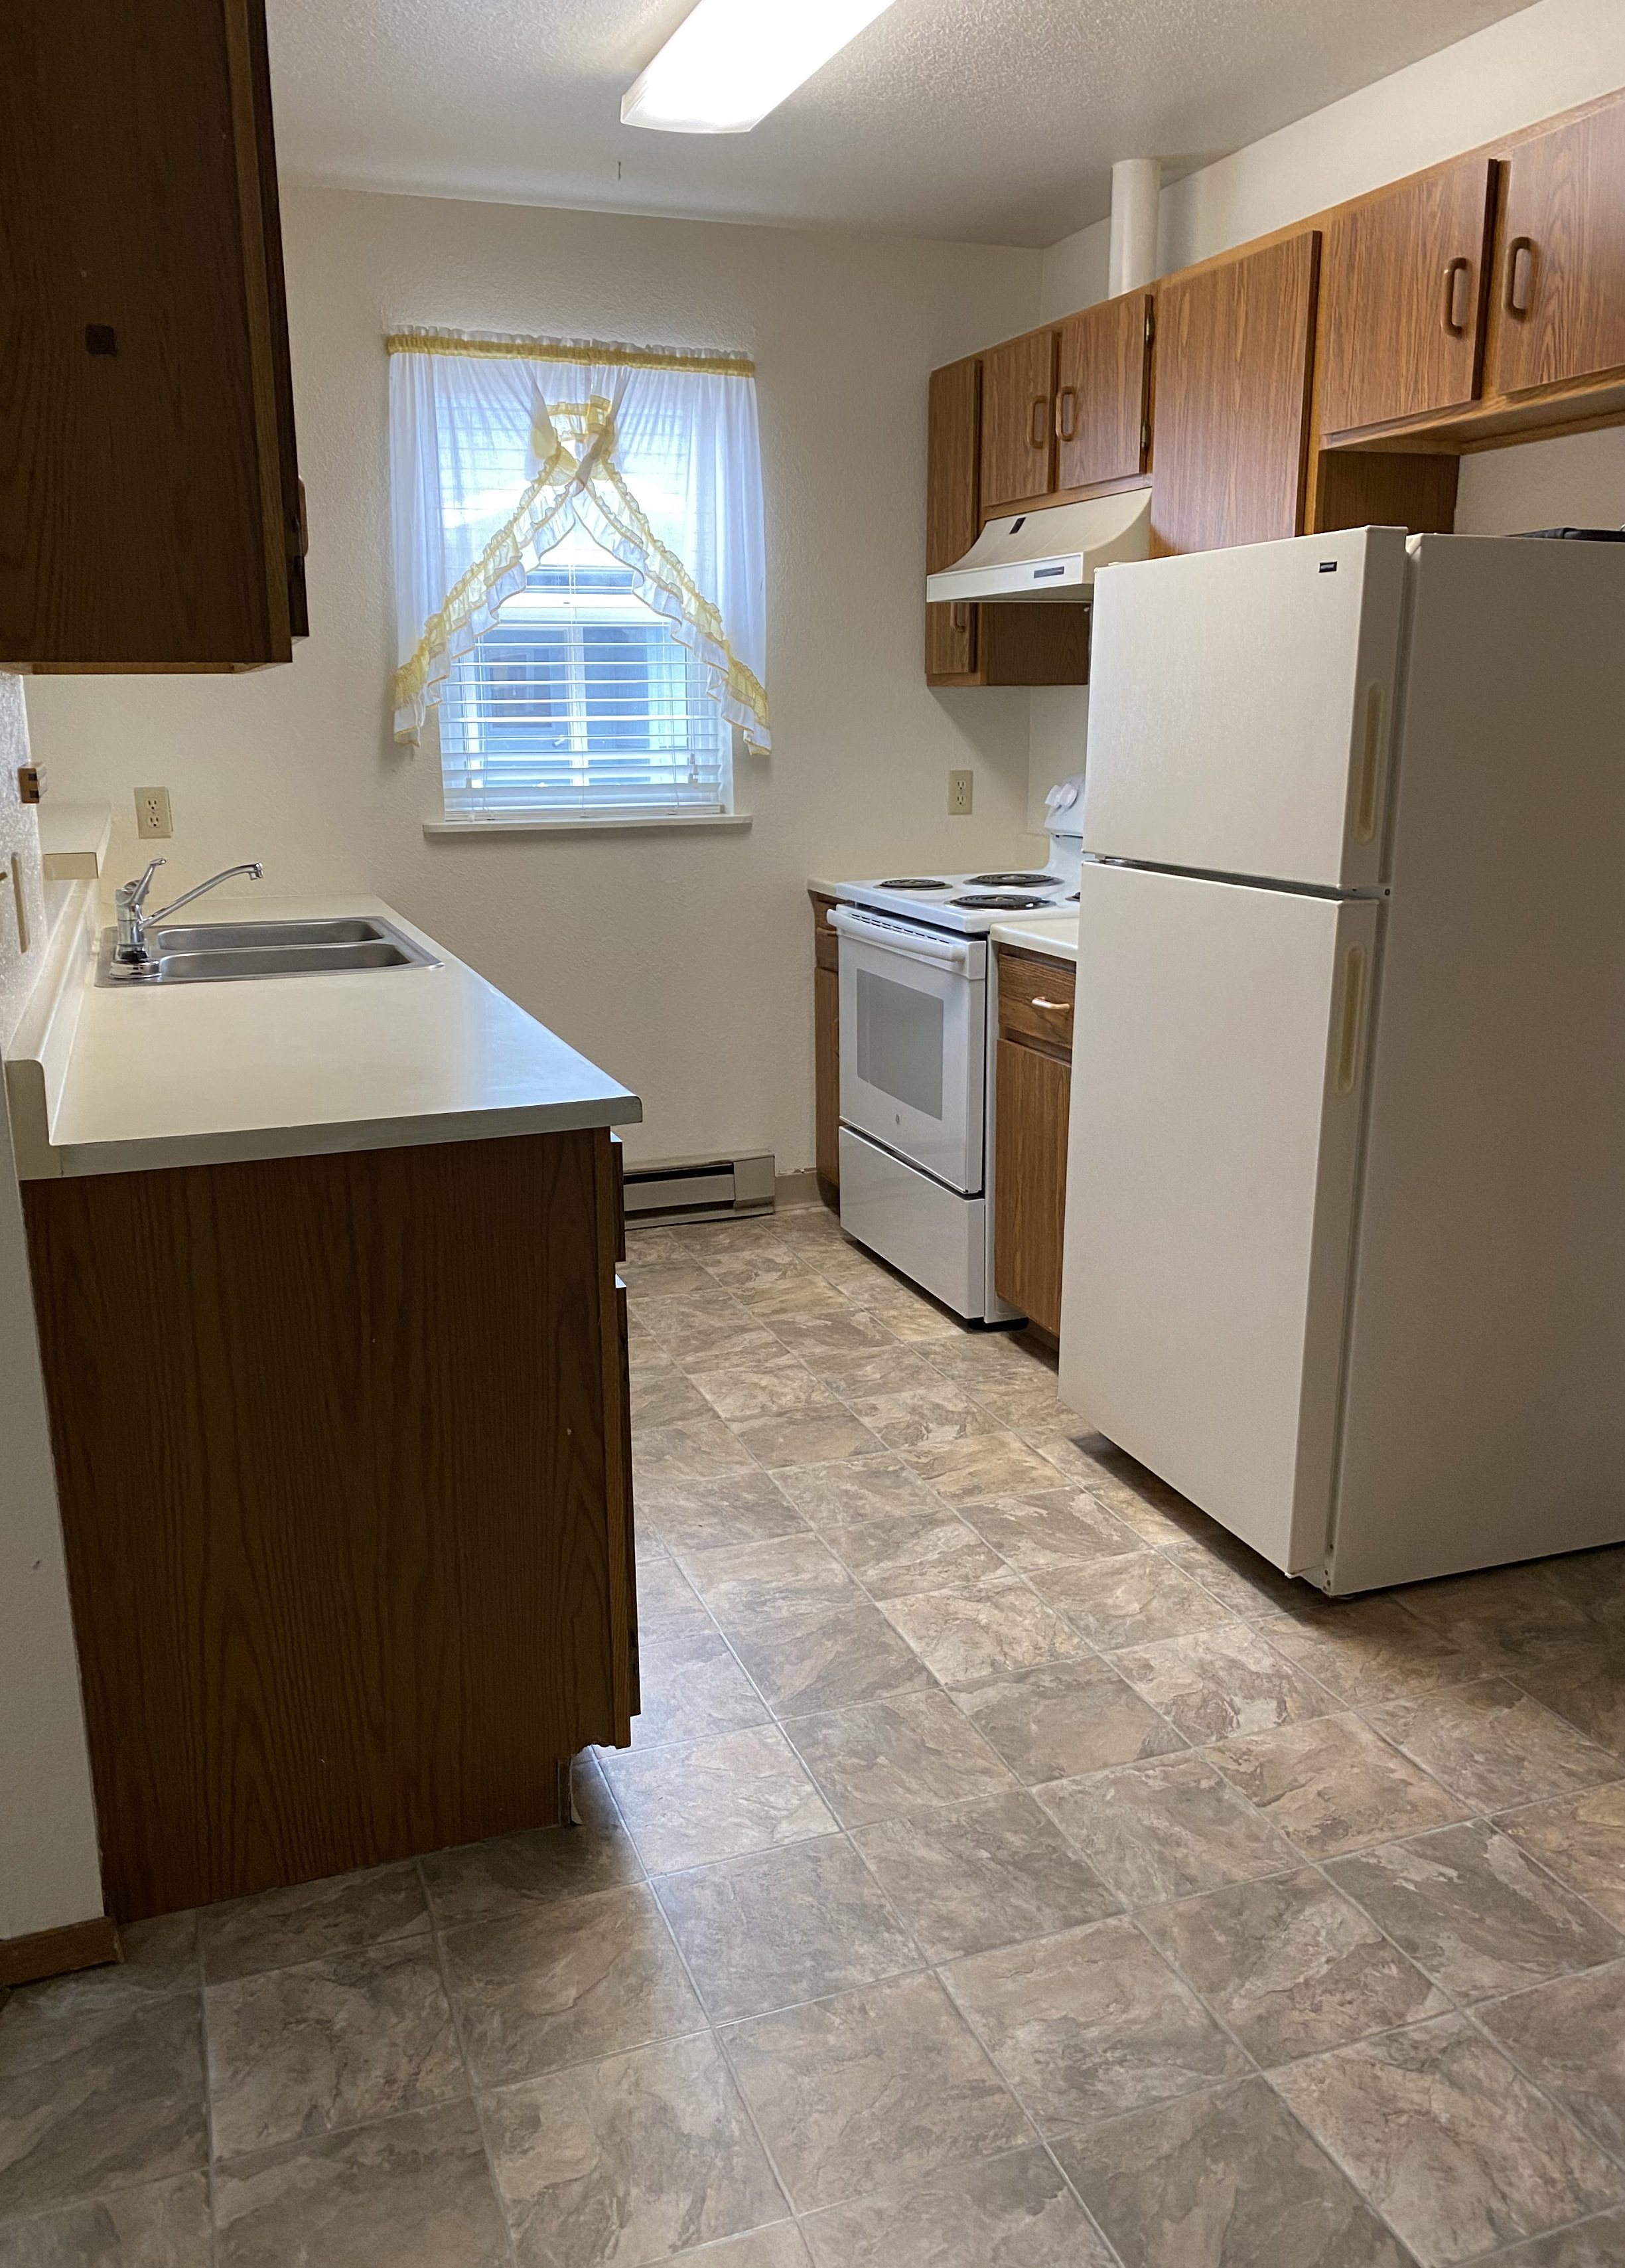 Image of refrigerator, stove, sink, cabinets, and window